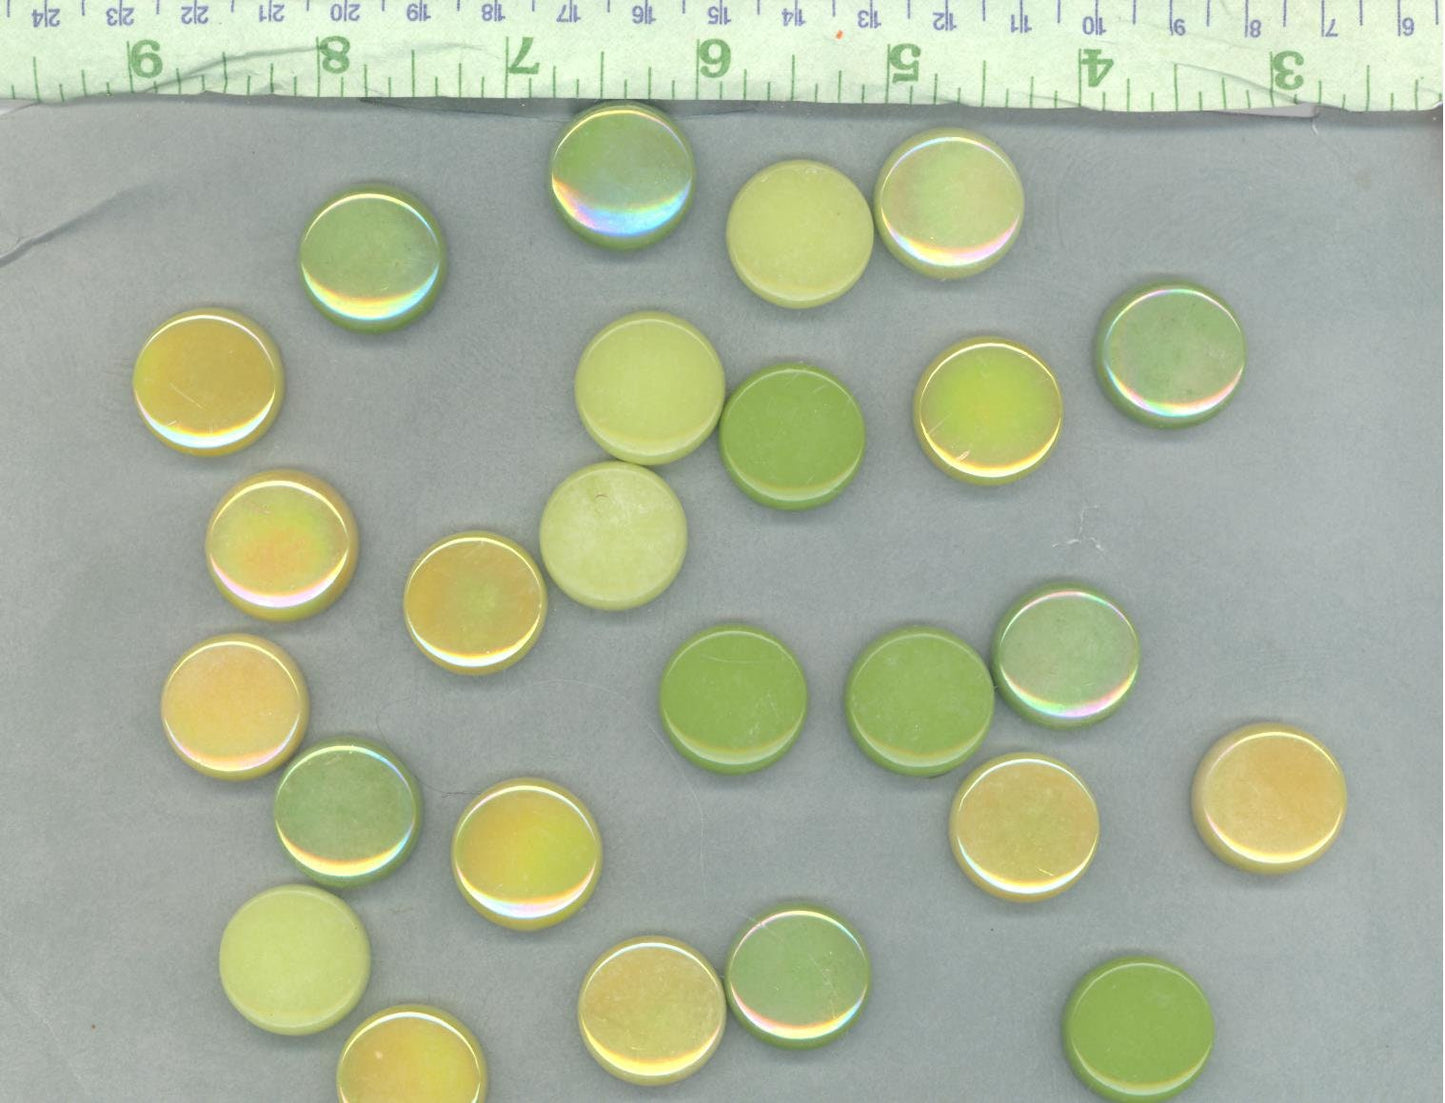 Spring Green Mix Large Glass Drops Mosaic Tiles - 100 grams - 20mm Mix of Gloss and Iridescent Glass Gems - Approx 20 Tiles